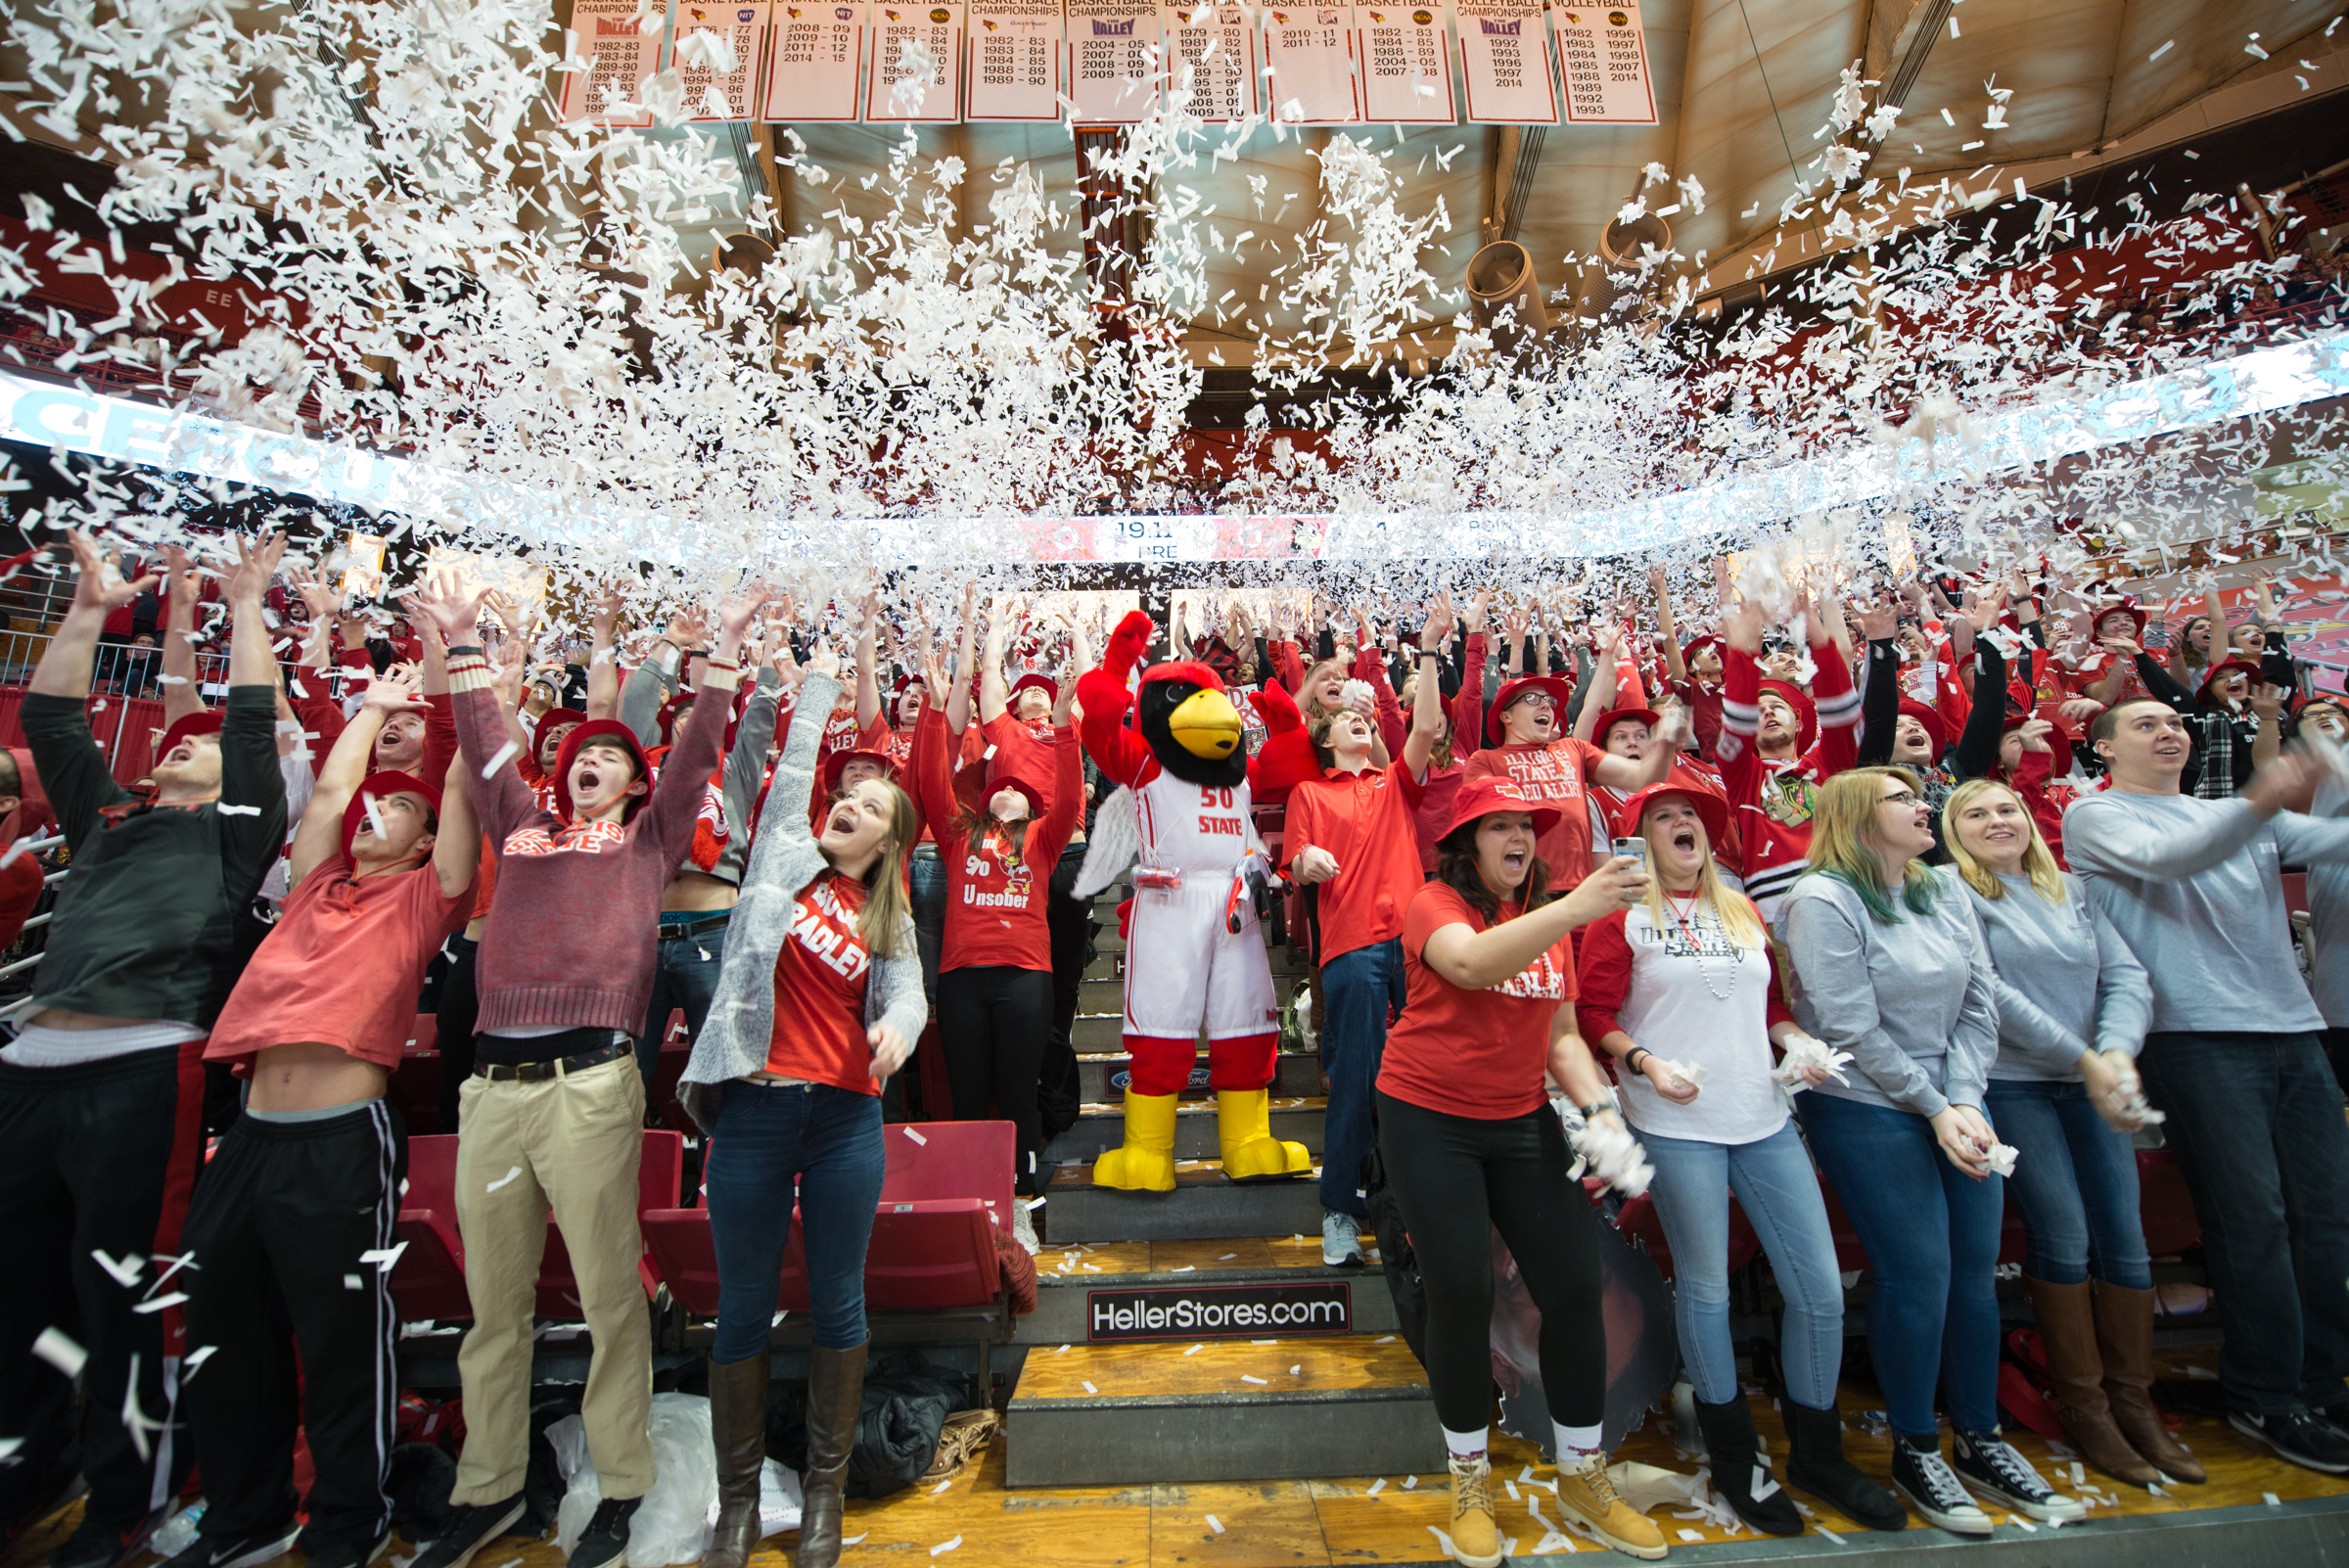 Reggie and basketball fans throw up confetti in celebration at Redbird Arena.